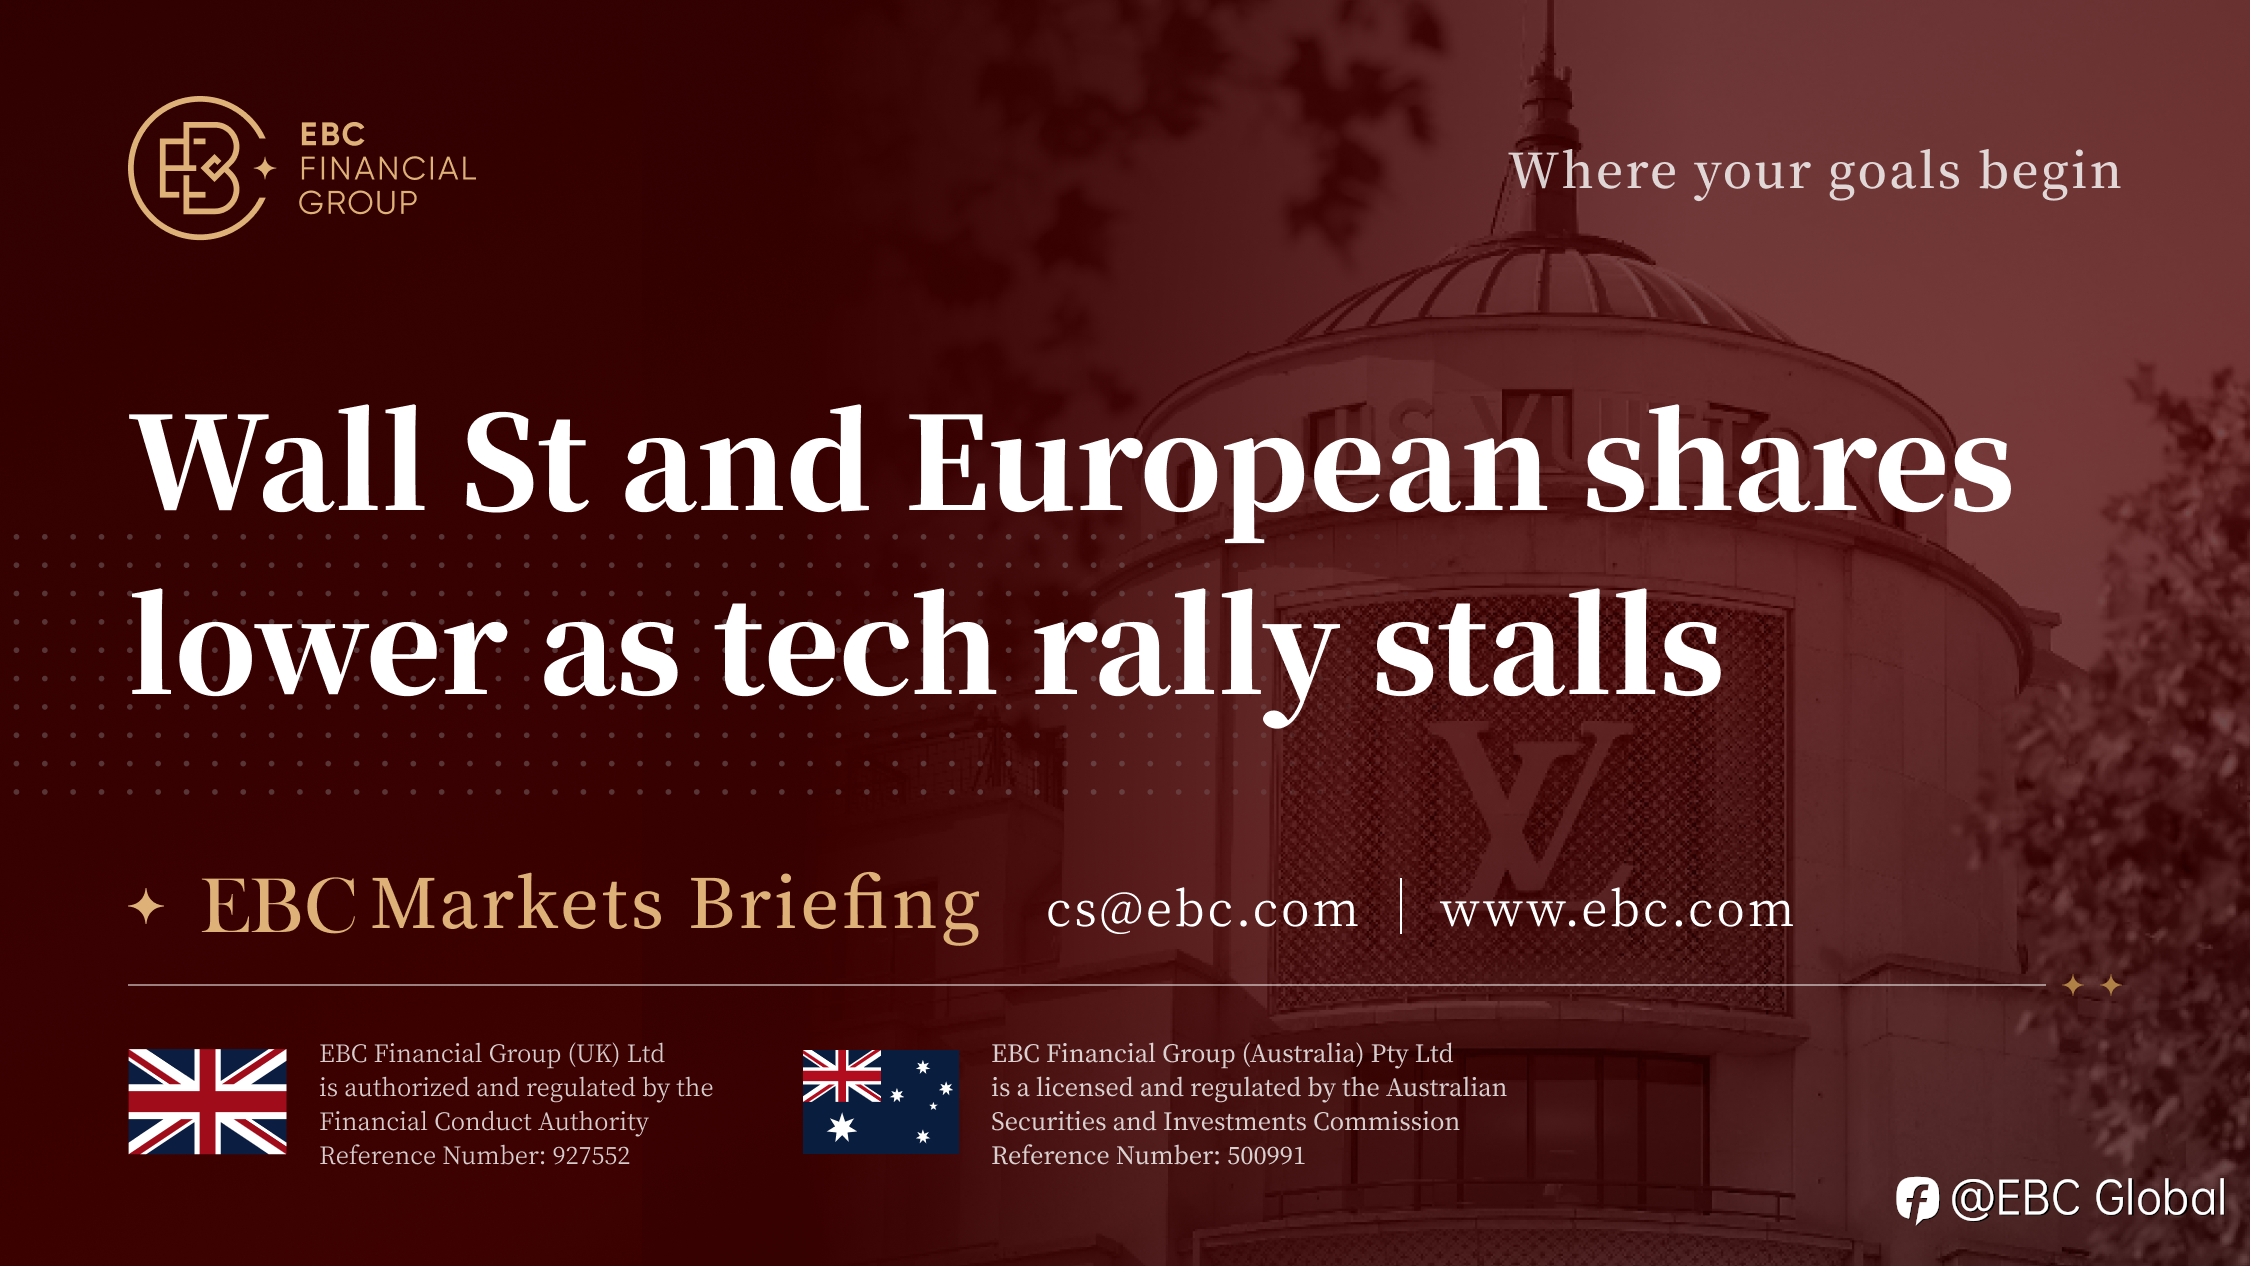 EBC Markets Briefing | Wall St and European shares lower as tech rally stalls